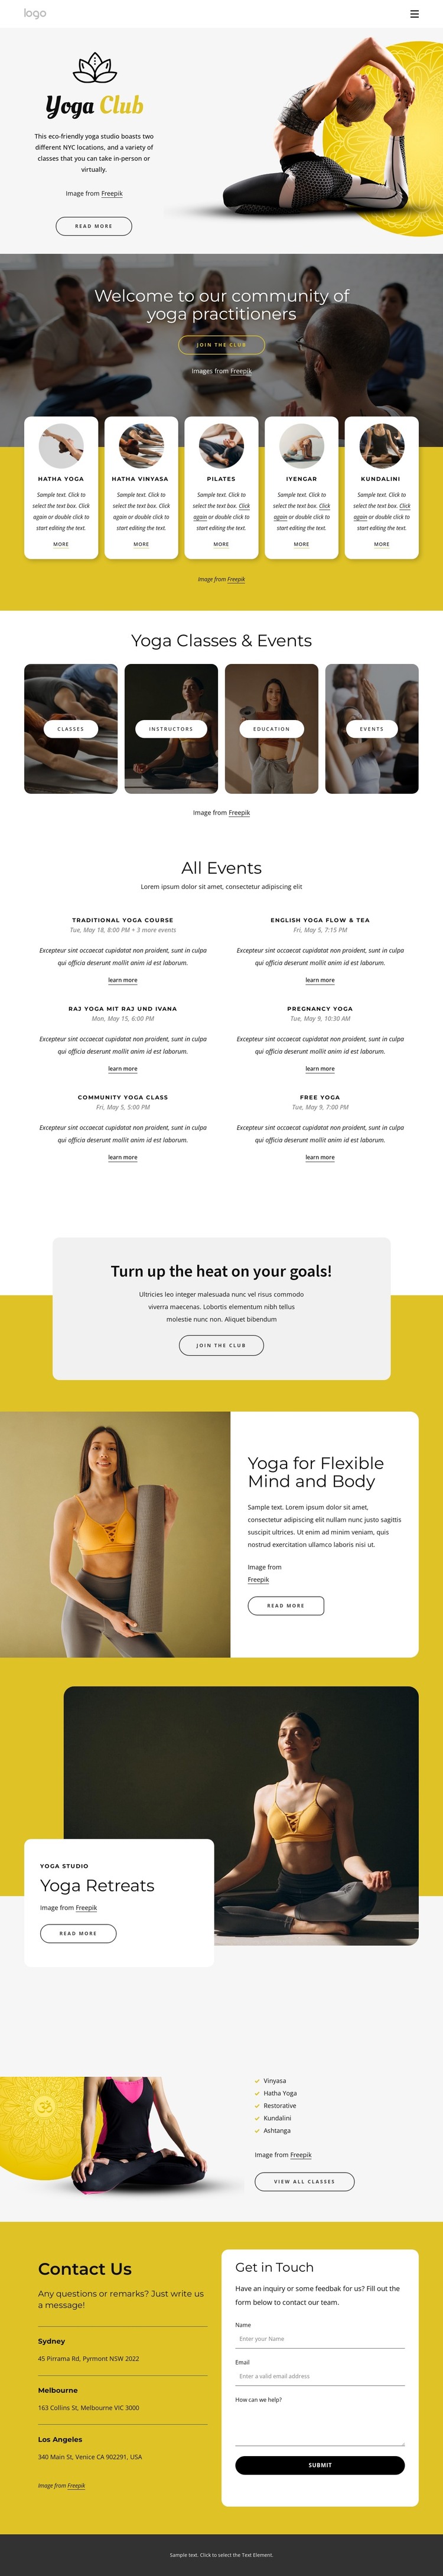 100 weekly in-studio classes HTML Template